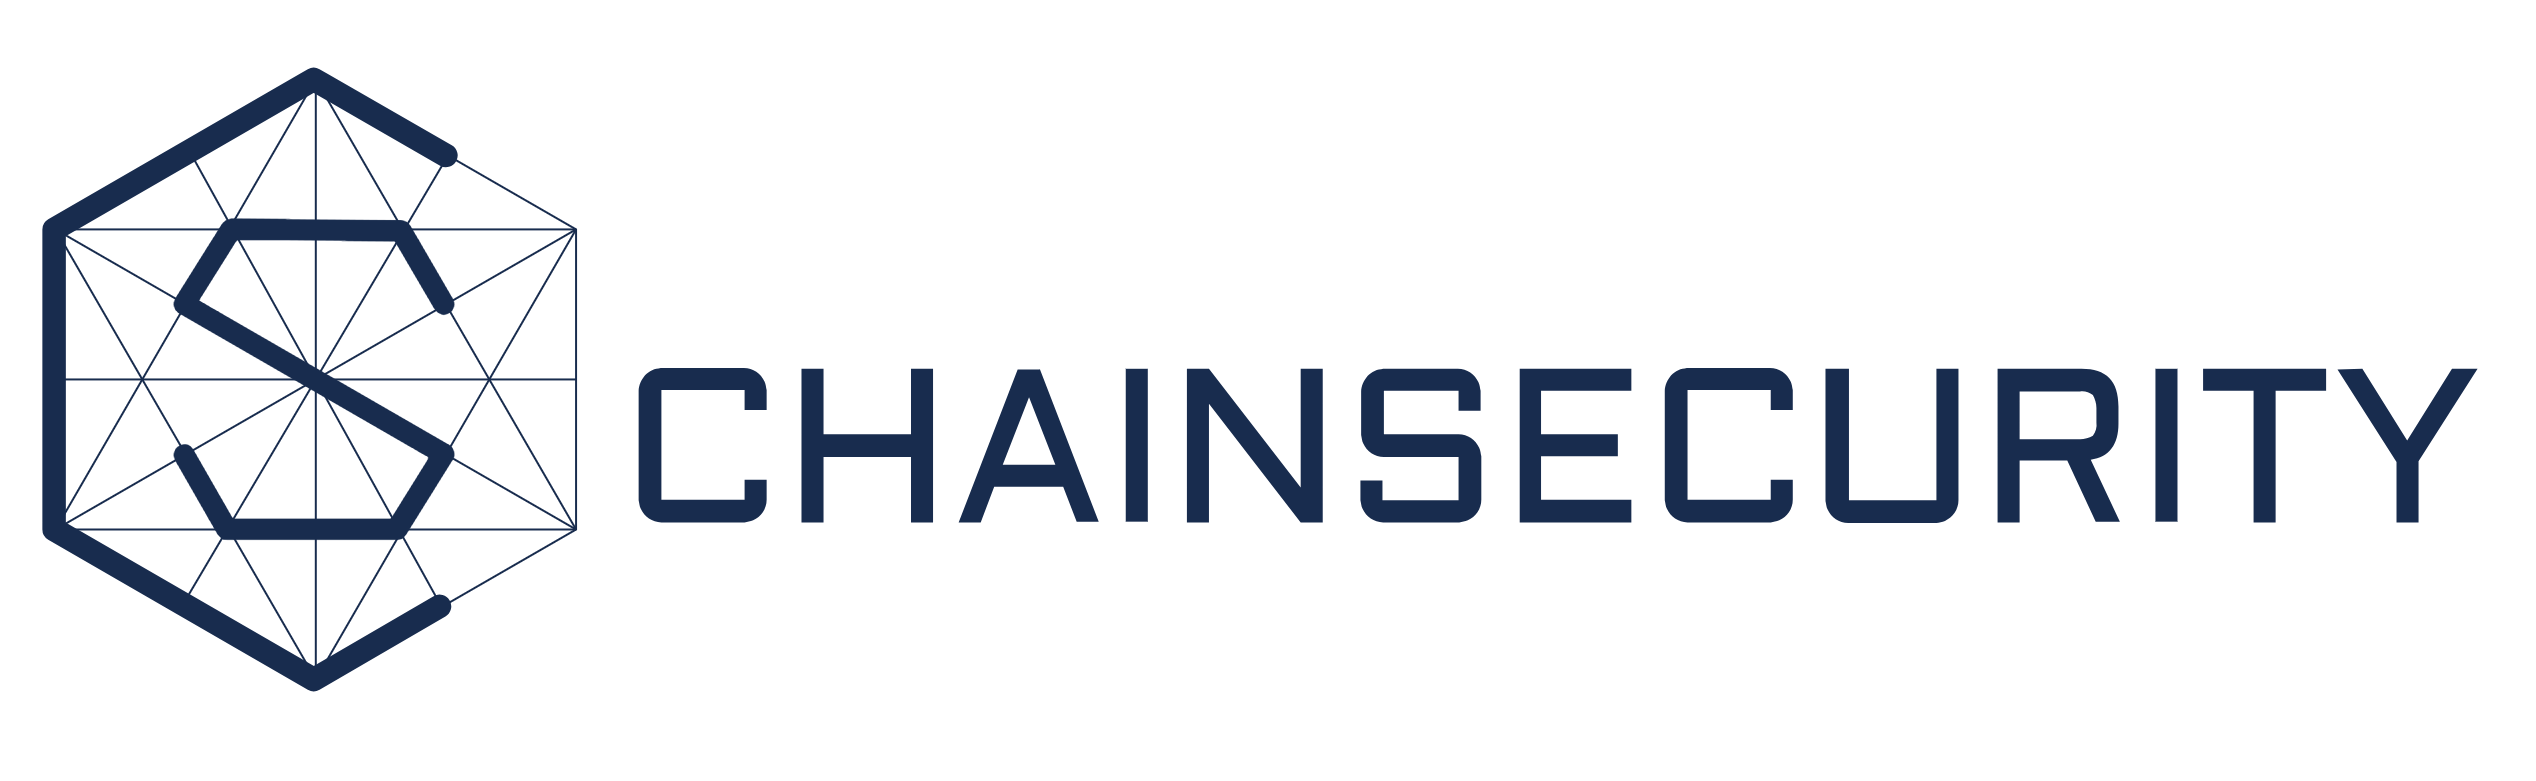 chainsec-logo-blue.png